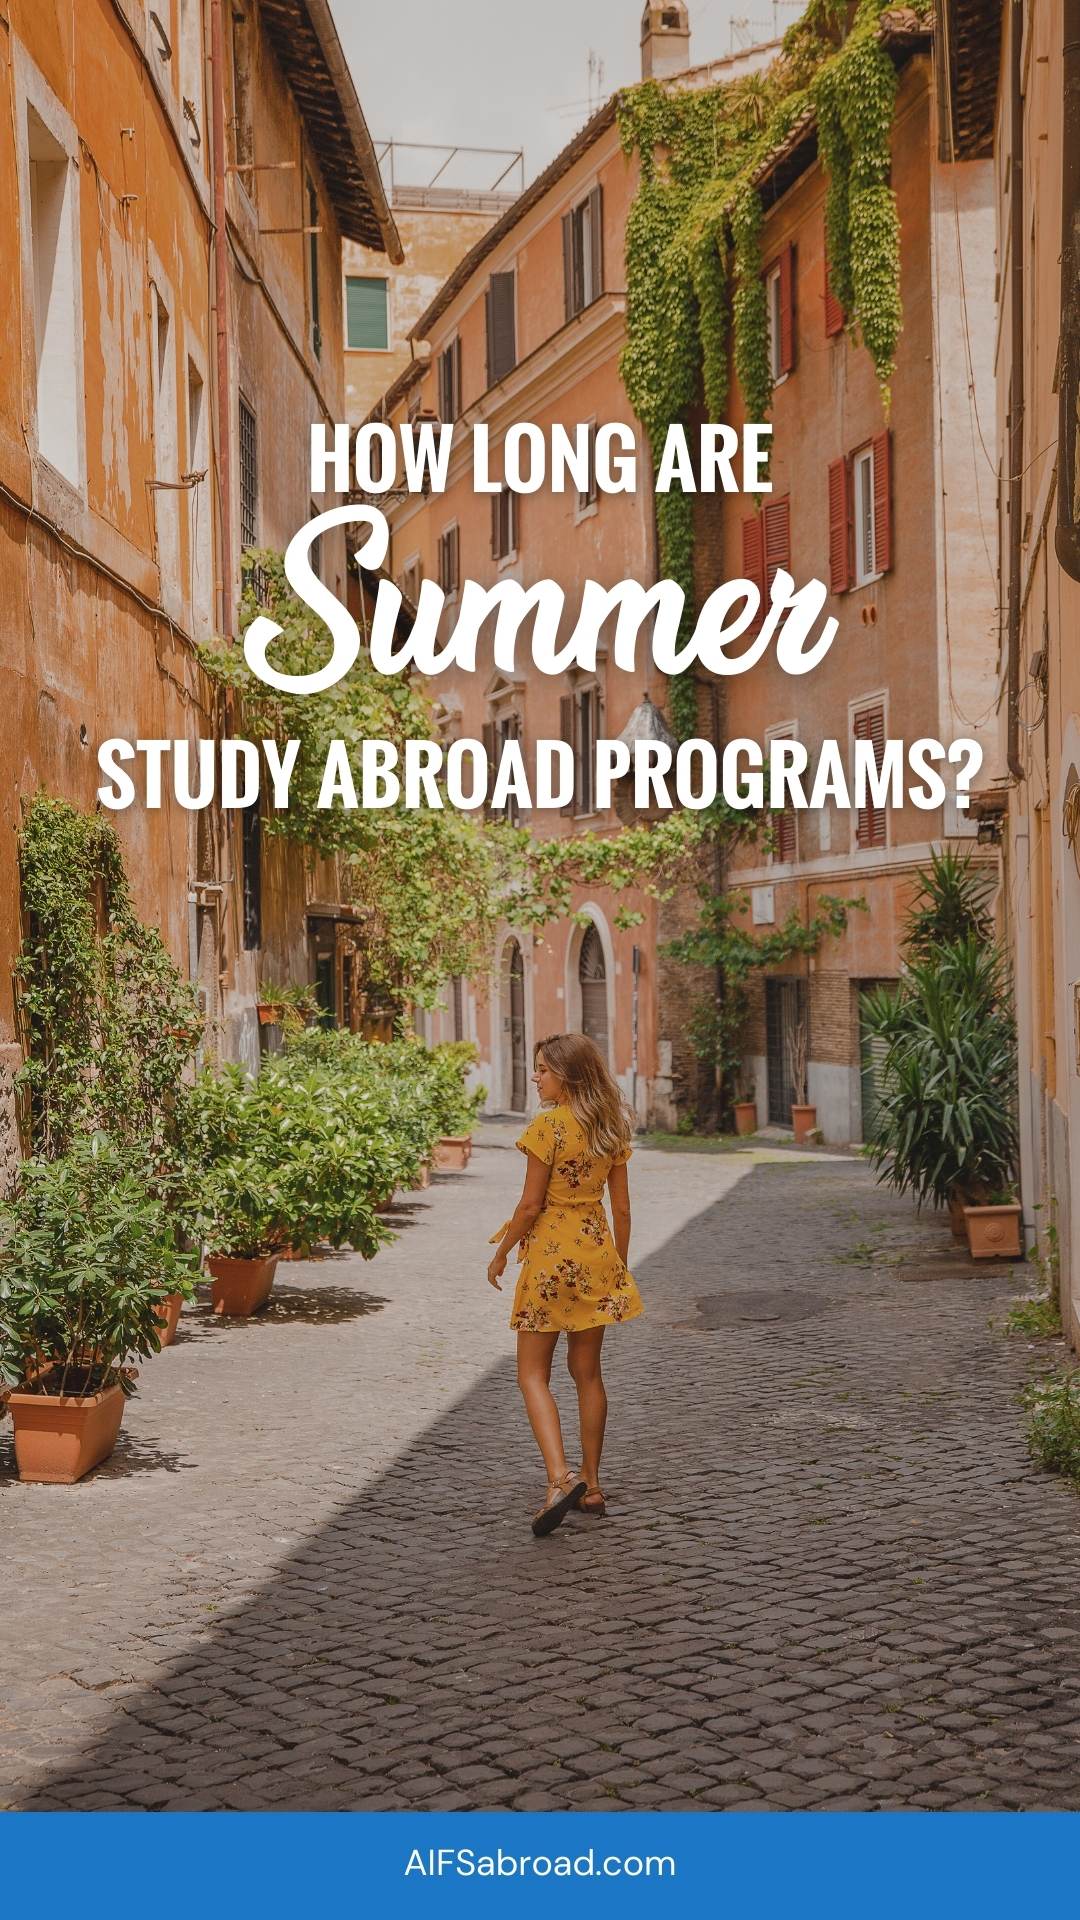 Pin image: Woman walking in quiet streets of Rome with text overlay, "How long are summer study abroad programs?"